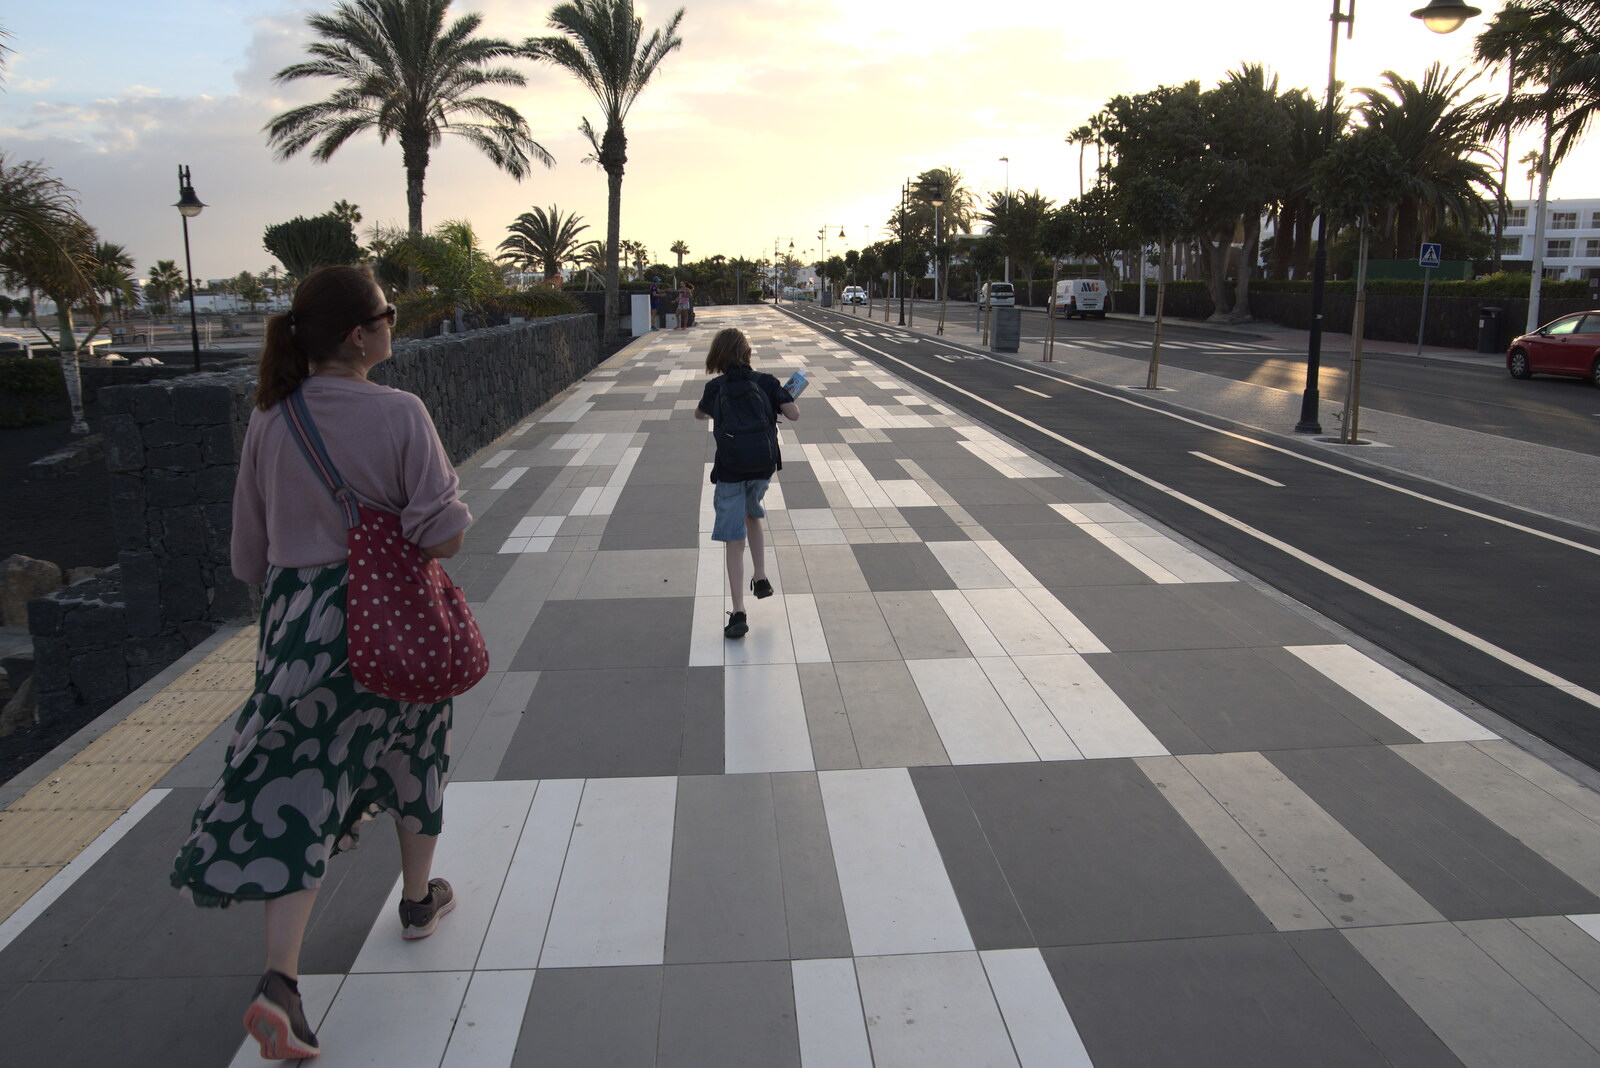 We walk down the coast to 'The Strip' from Five Days in Lanzarote, Canary Islands, Spain - 24th October 2021